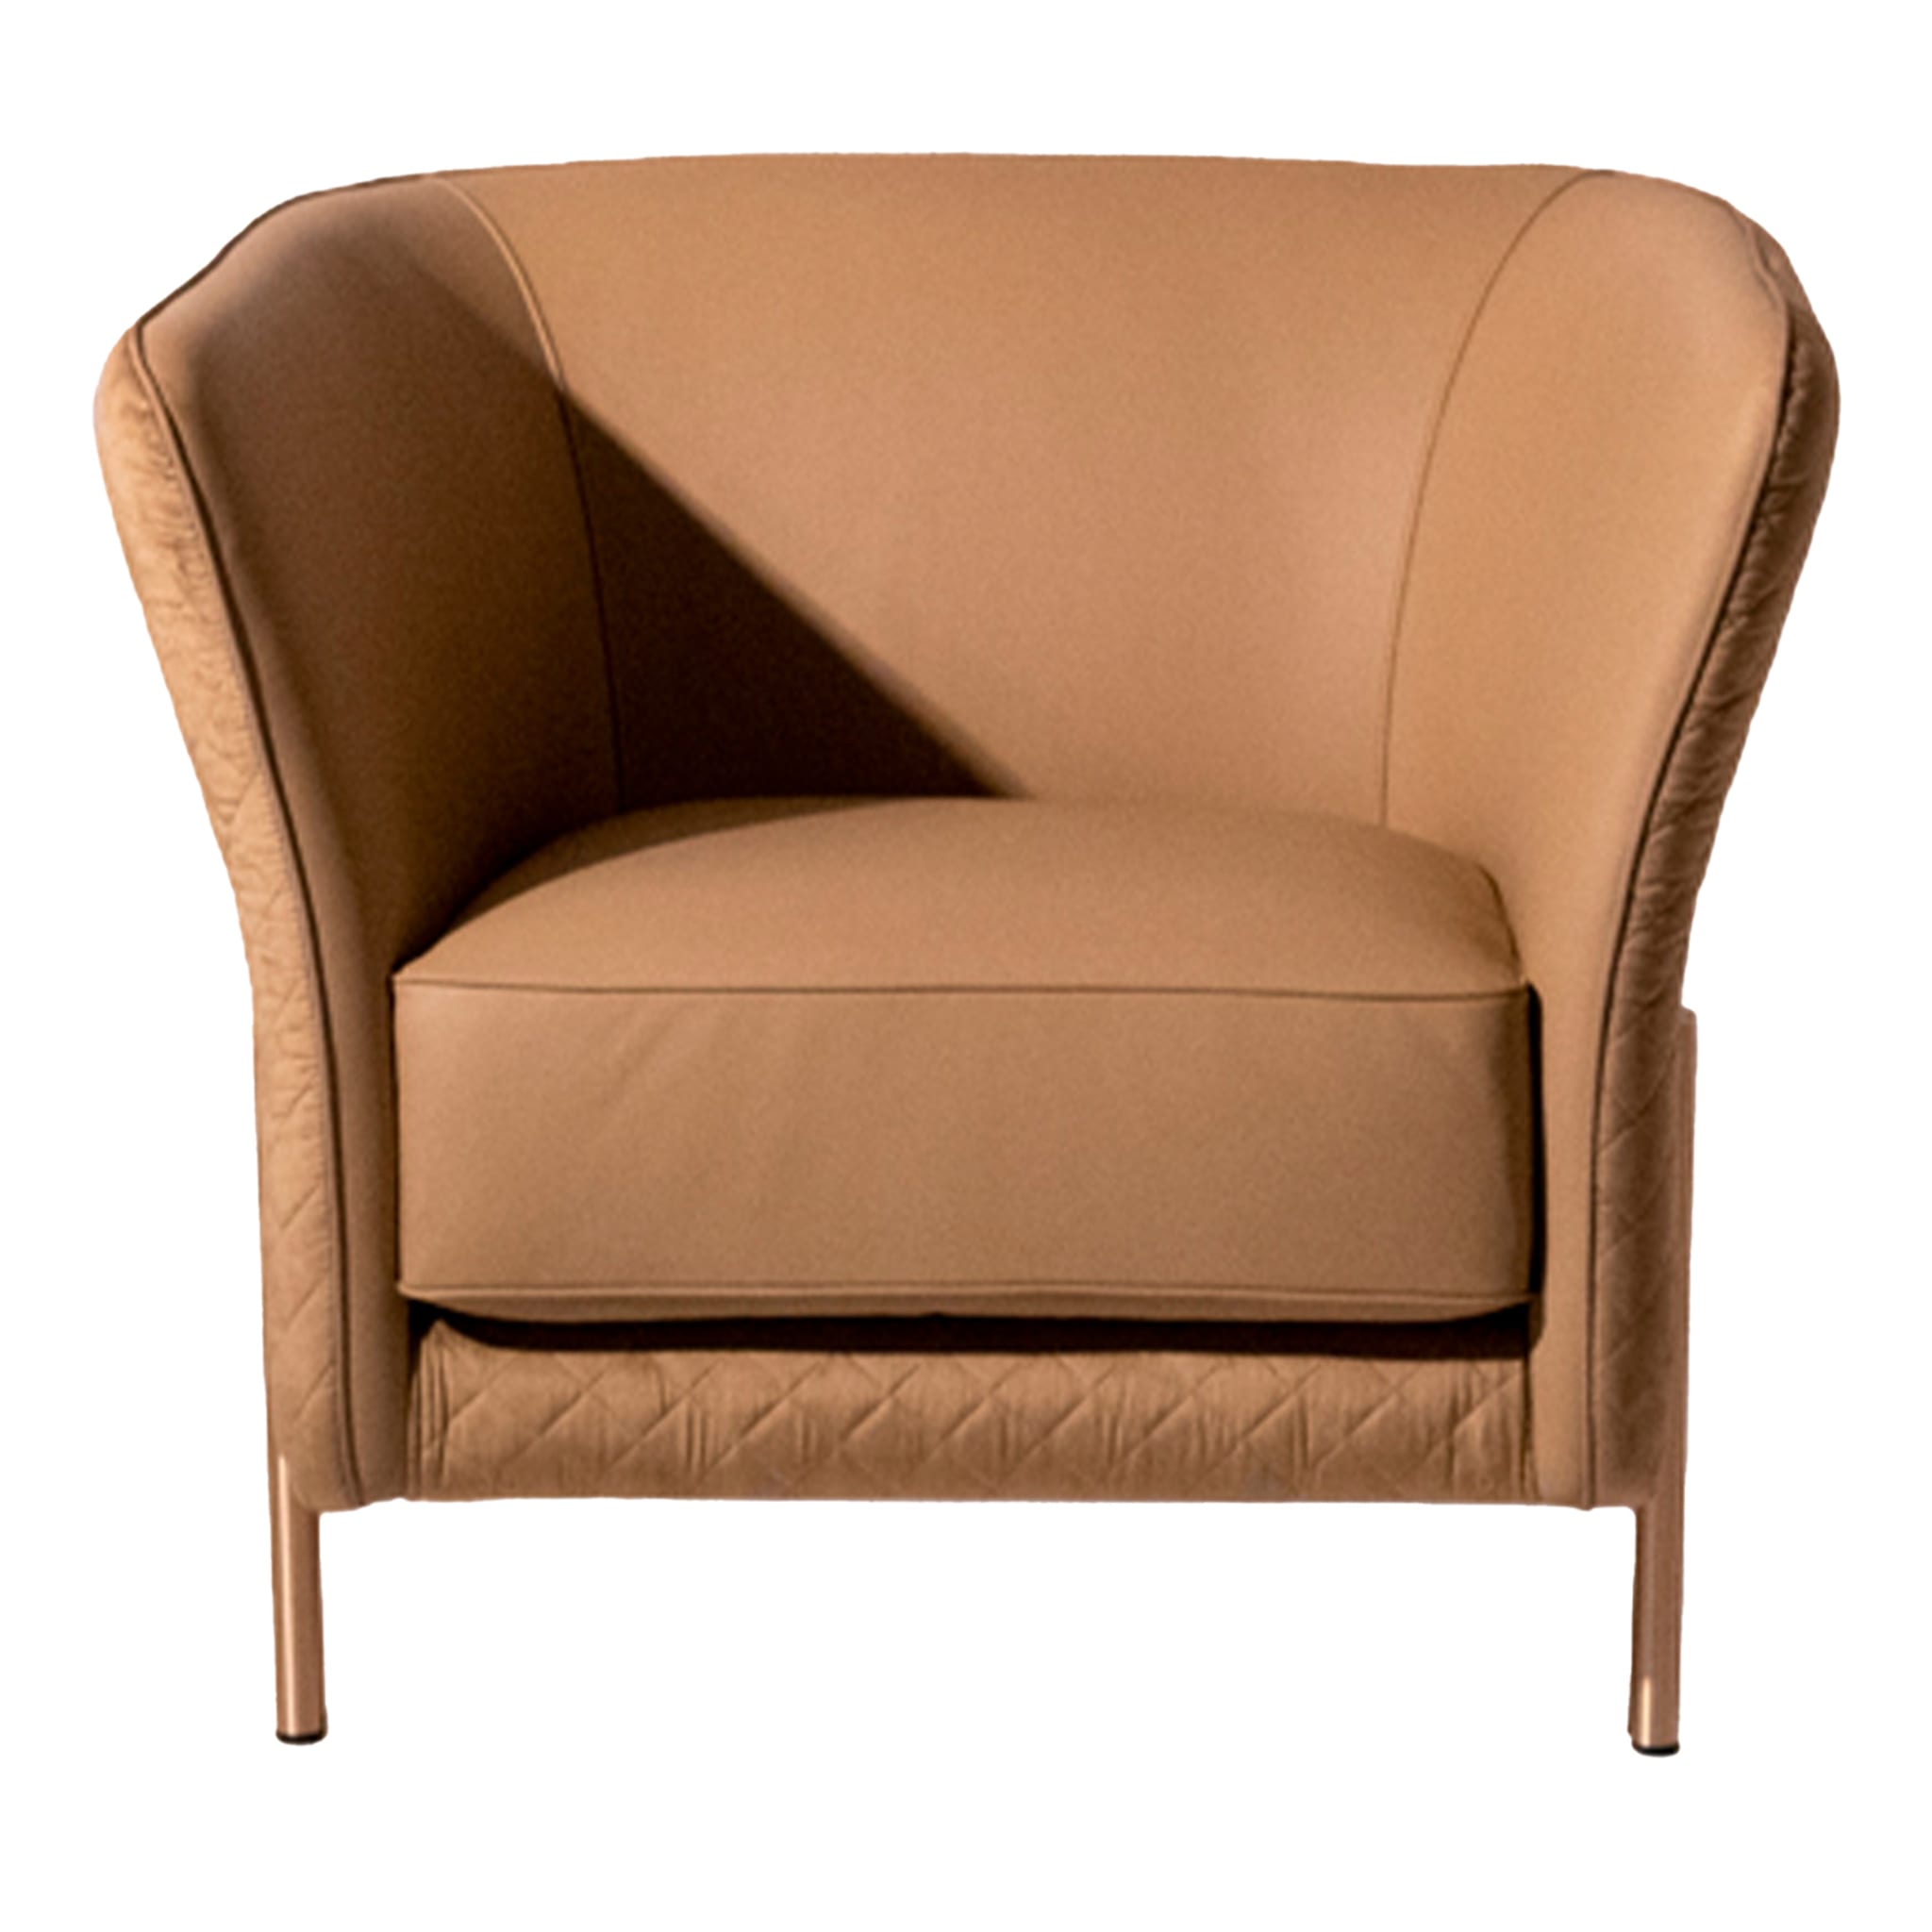 Universal Armchair by Marco and Giulio Mantellassi - Main view